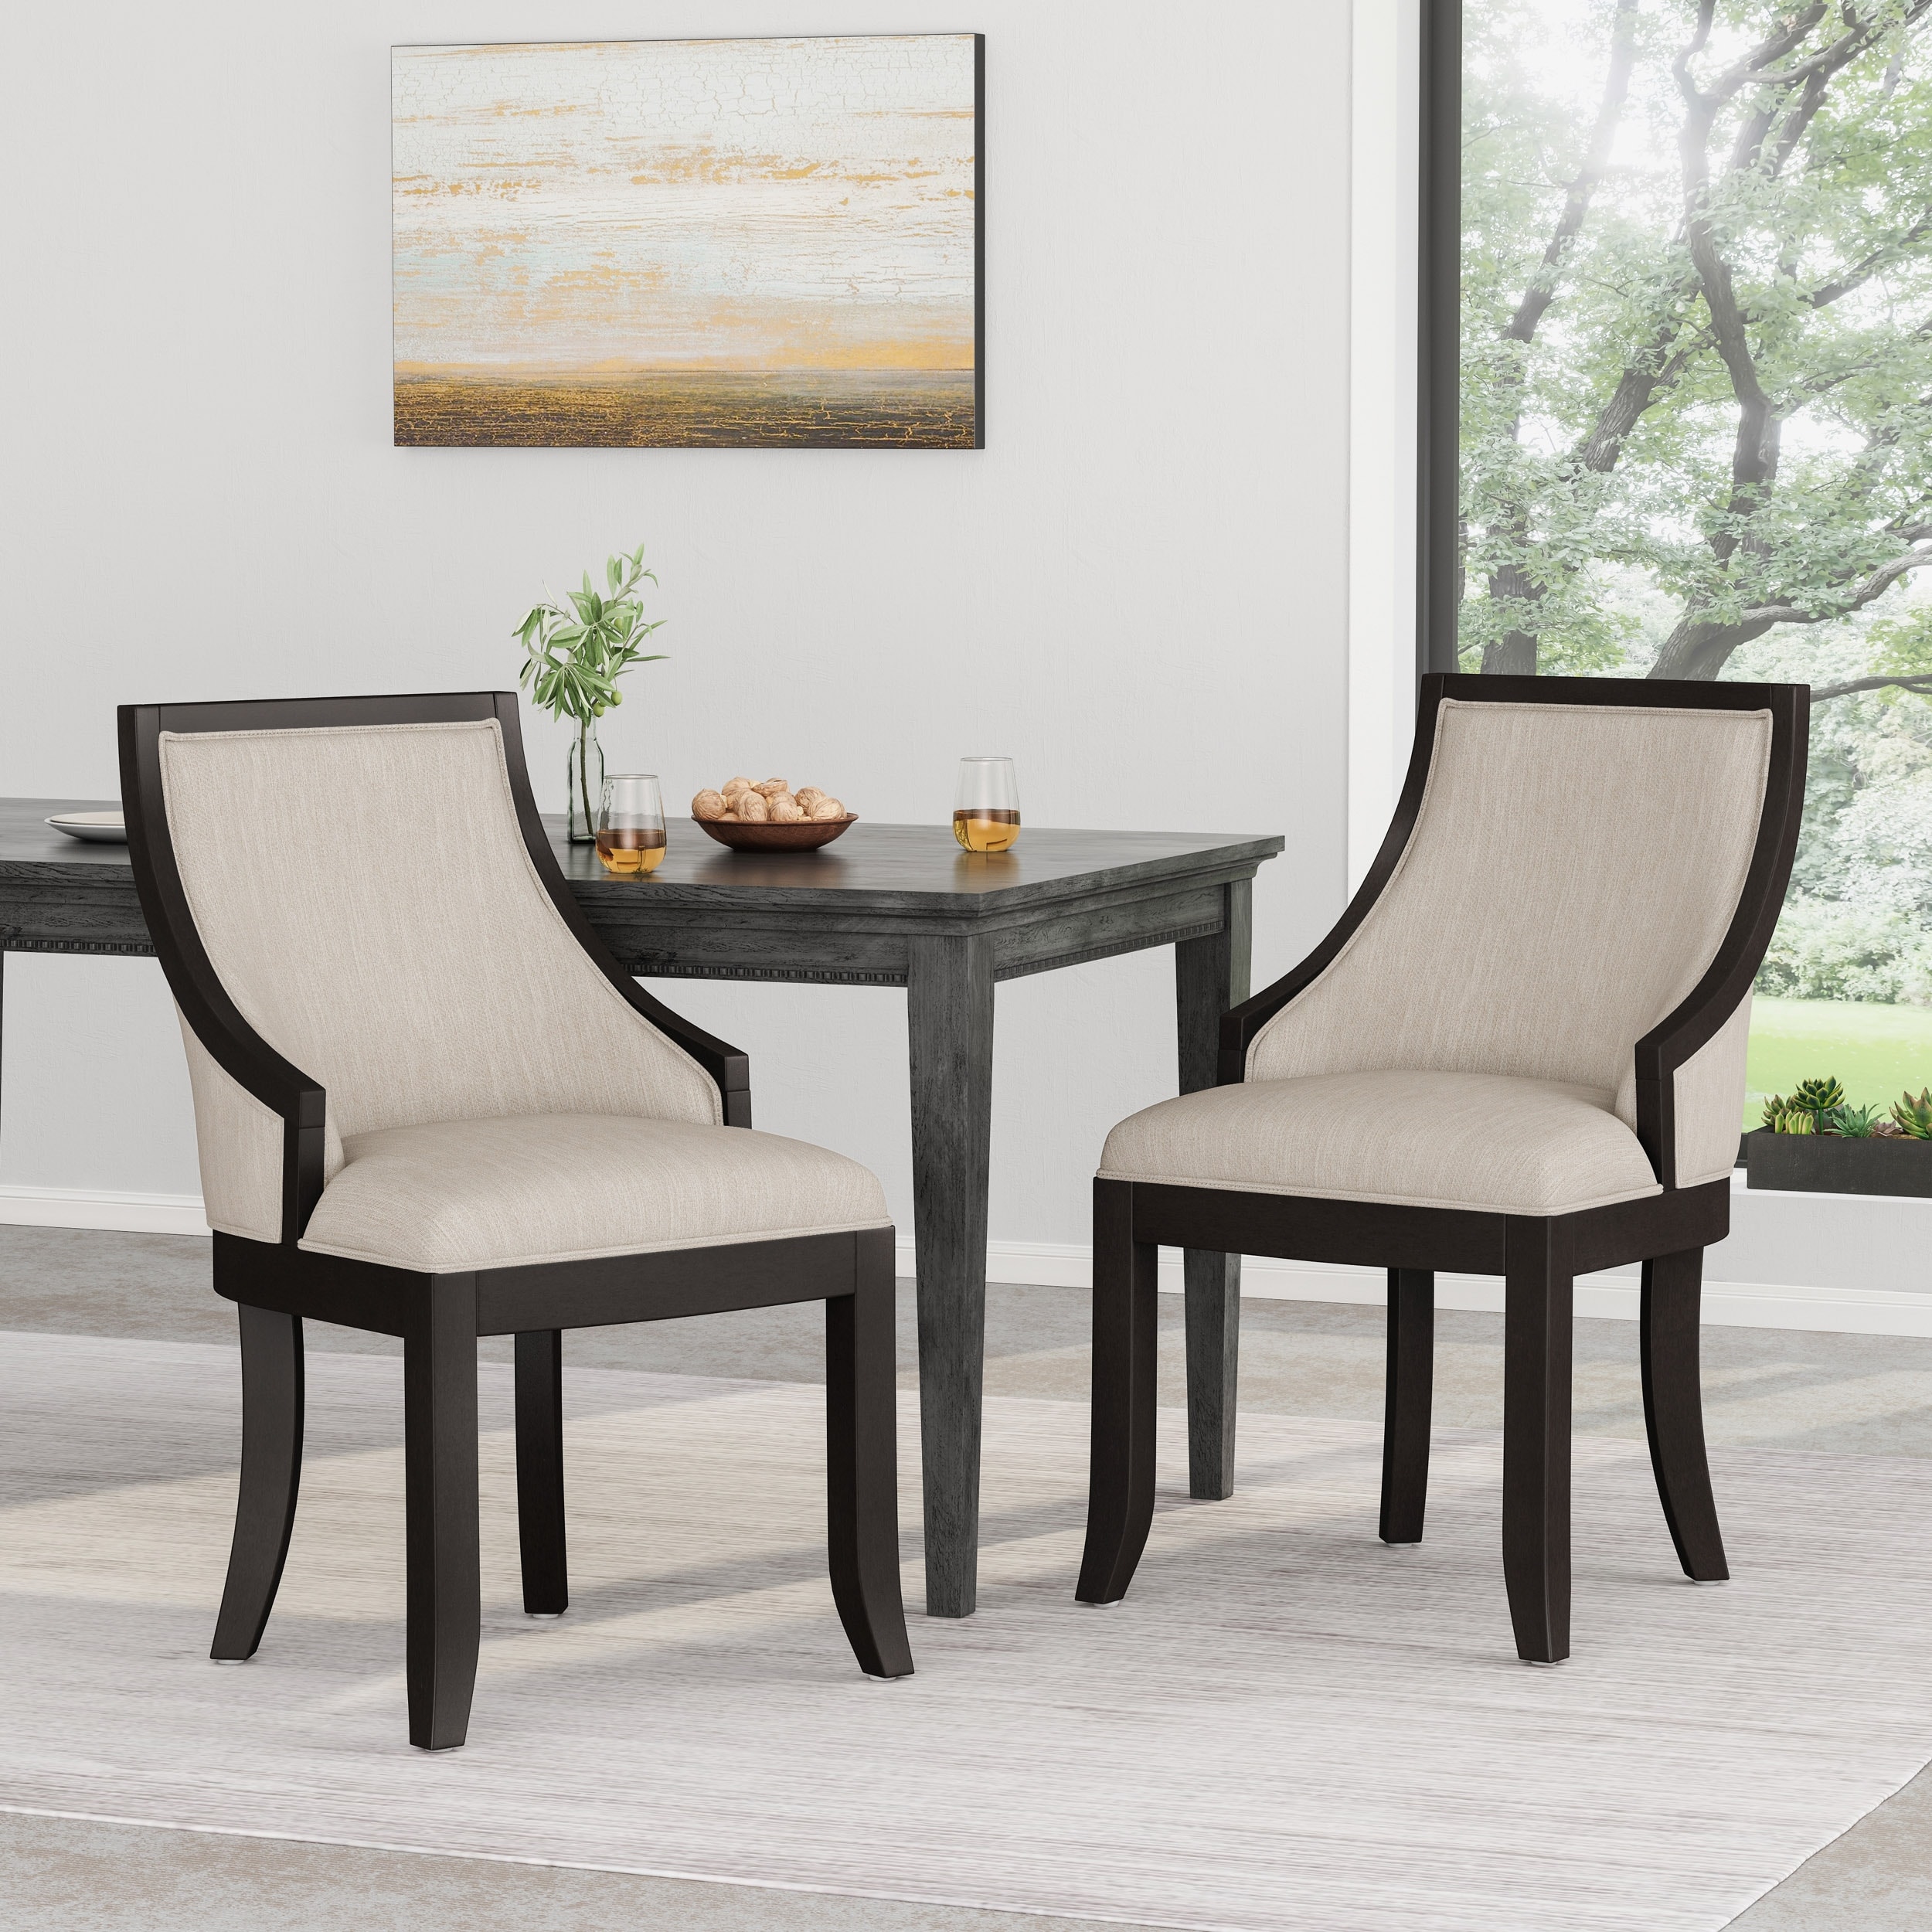 https://ak1.ostkcdn.com/images/products/is/images/direct/fd99bee84e25649b8eb1ce63287fa49964bd5c63/Thurber-Upholstered-Birch-Wood-Dining-Chairs-%28Set-of-2%29-by-Christopher-Knight-Home.jpg